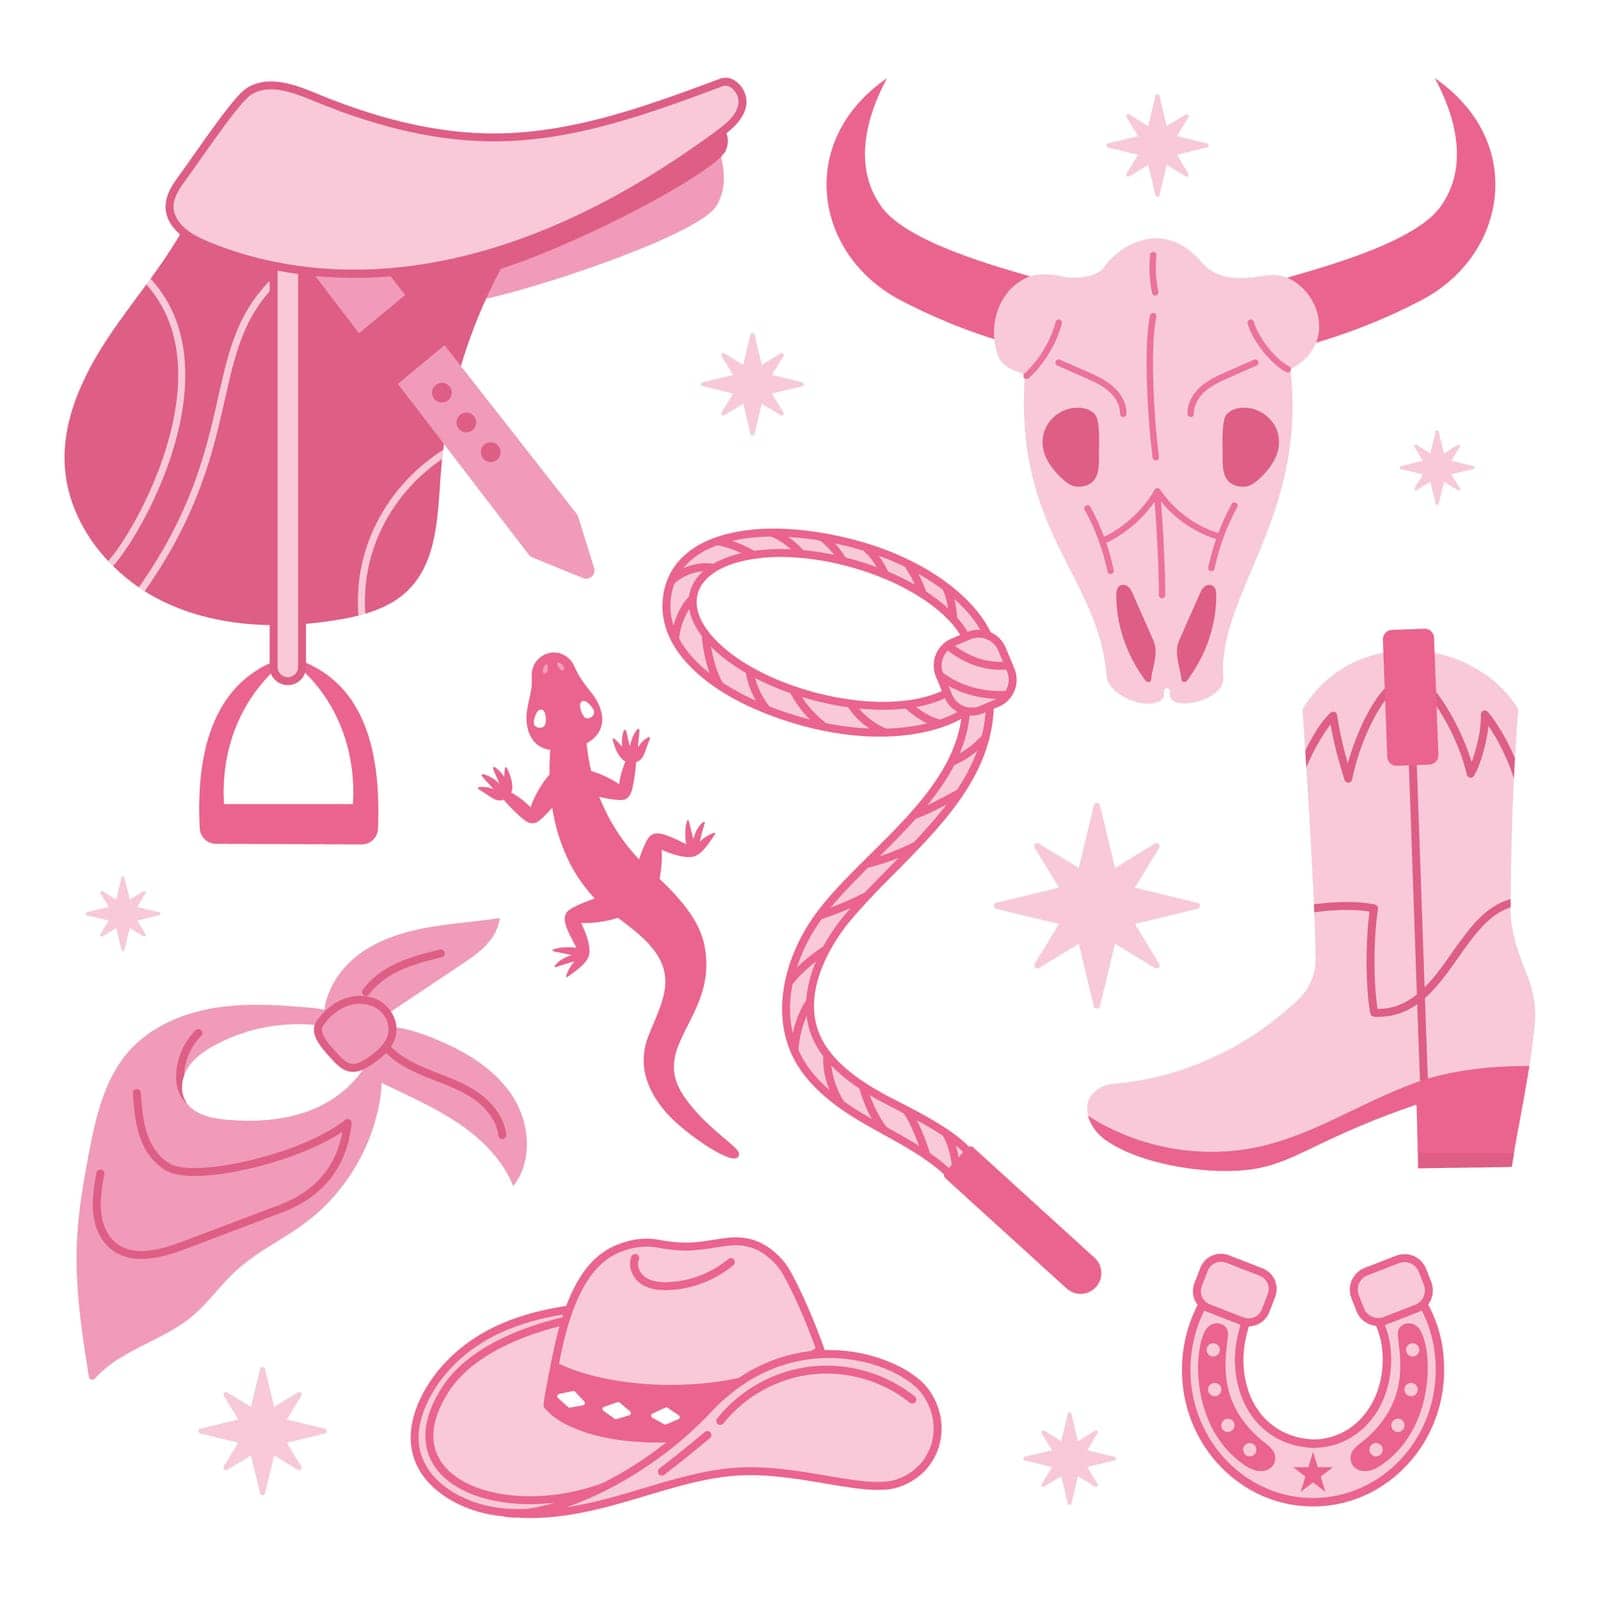 Cowboy Pink core fashion elements collection. Cowgirl boots, hat, horseshoe, cactus and horse saddle. Cowboy western and wild west theme set. Hand drawn vector illustration. Doodle icons